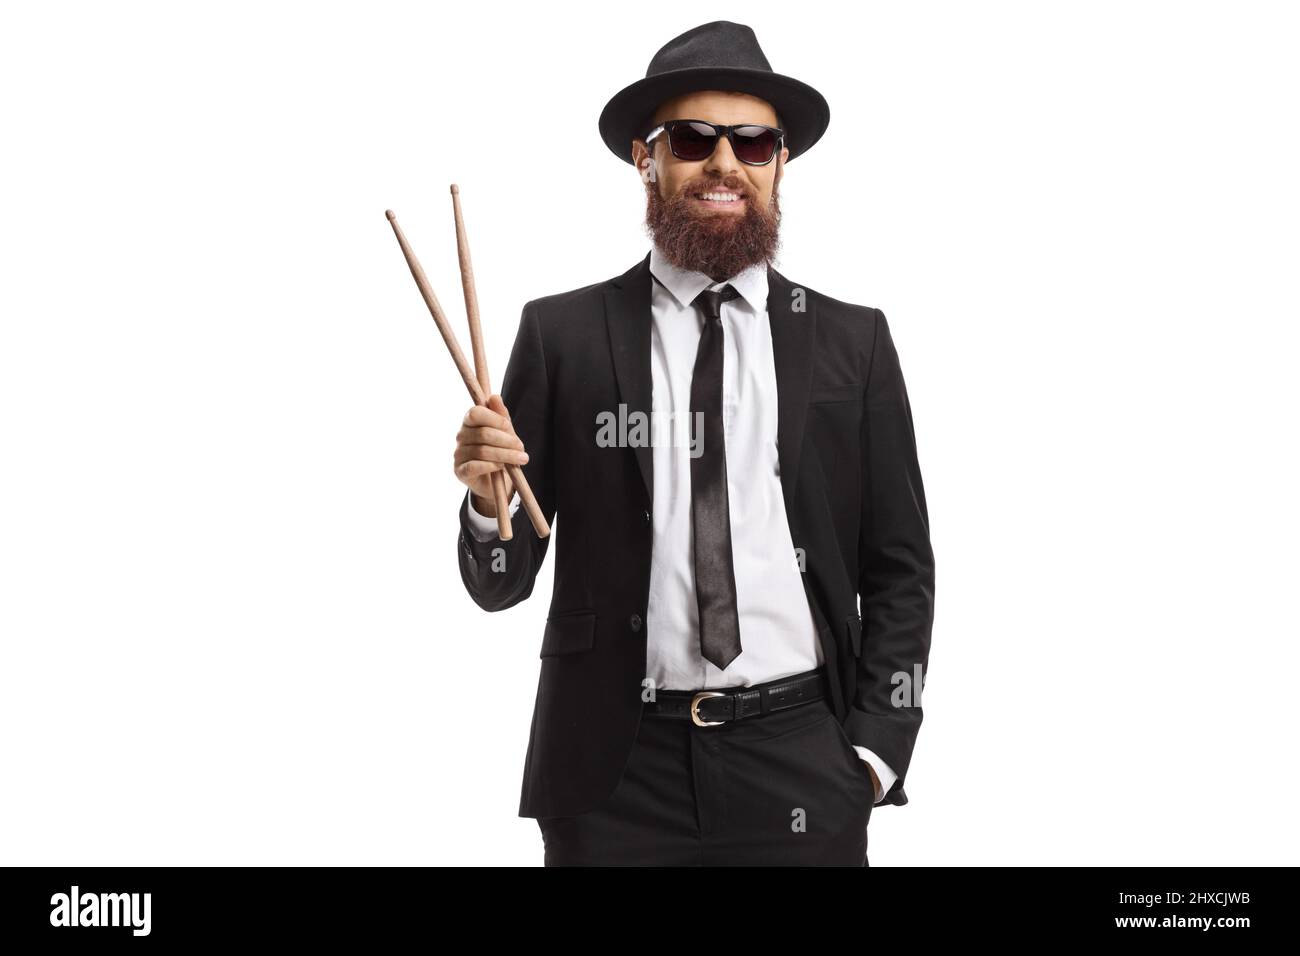 Man in a black suit holding a pair of drumsticks isolated on white background Stock Photo